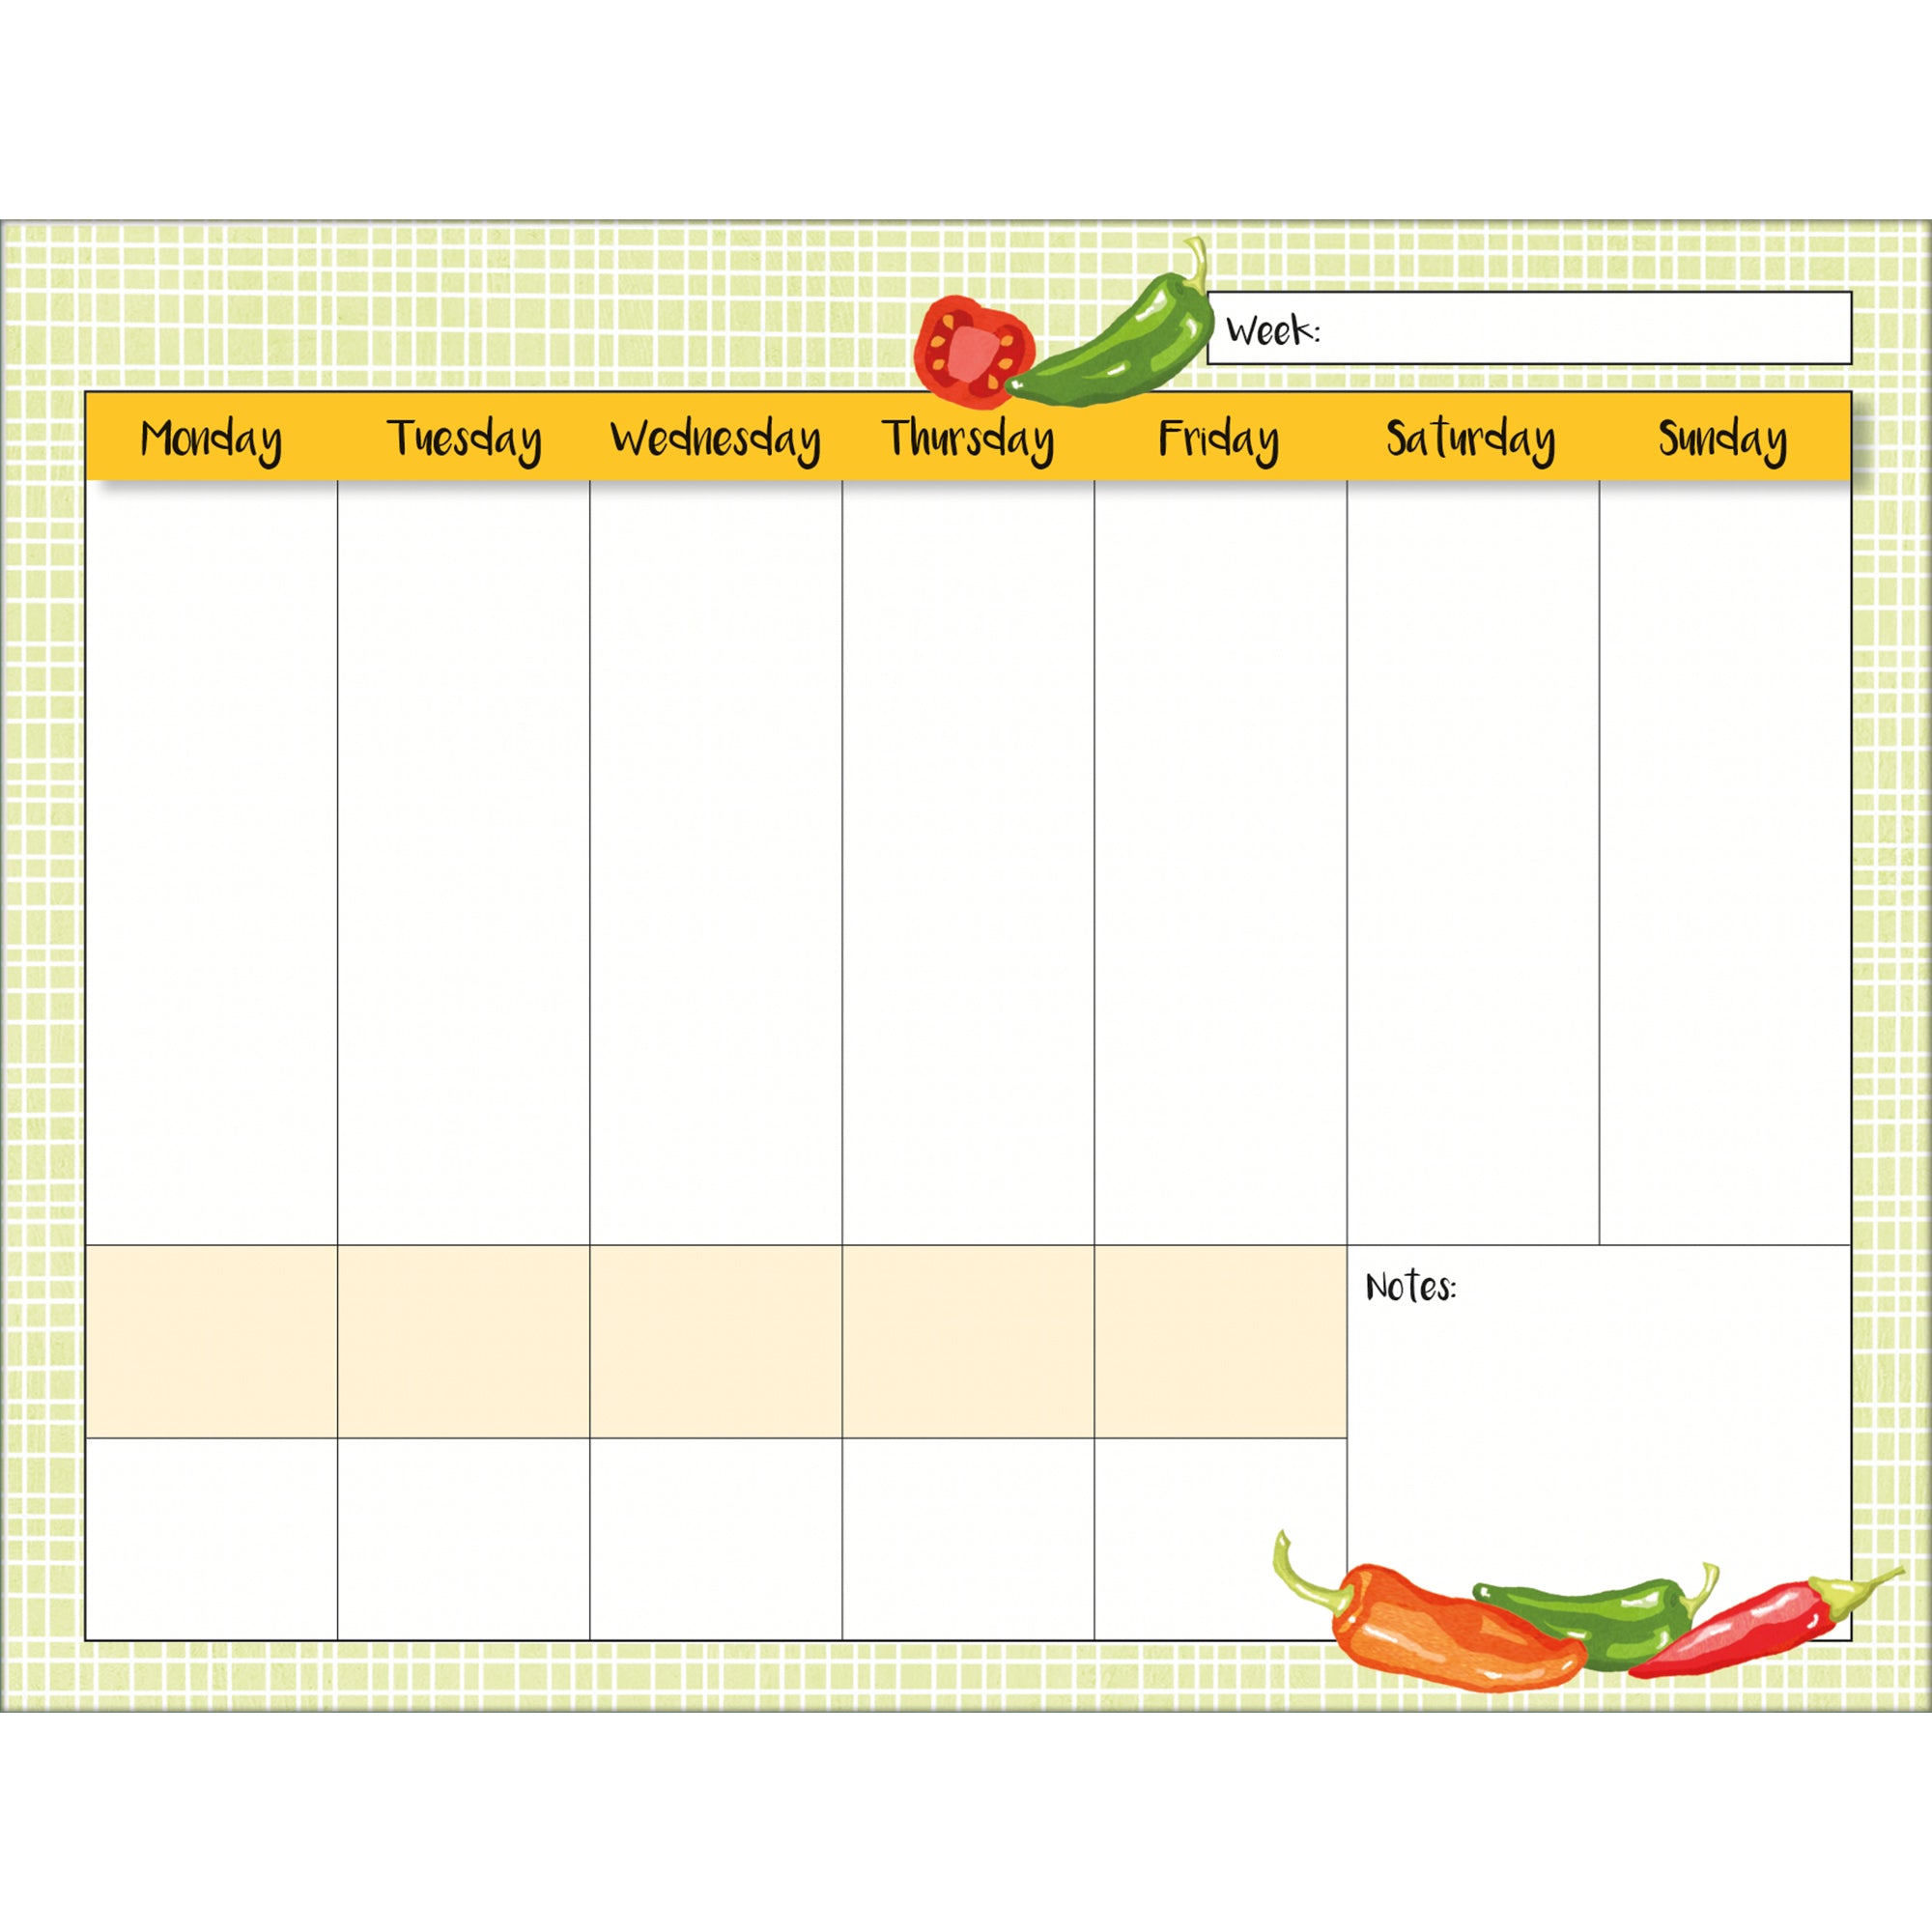 2025 Family - LANG Plant It Square Wall Calendar